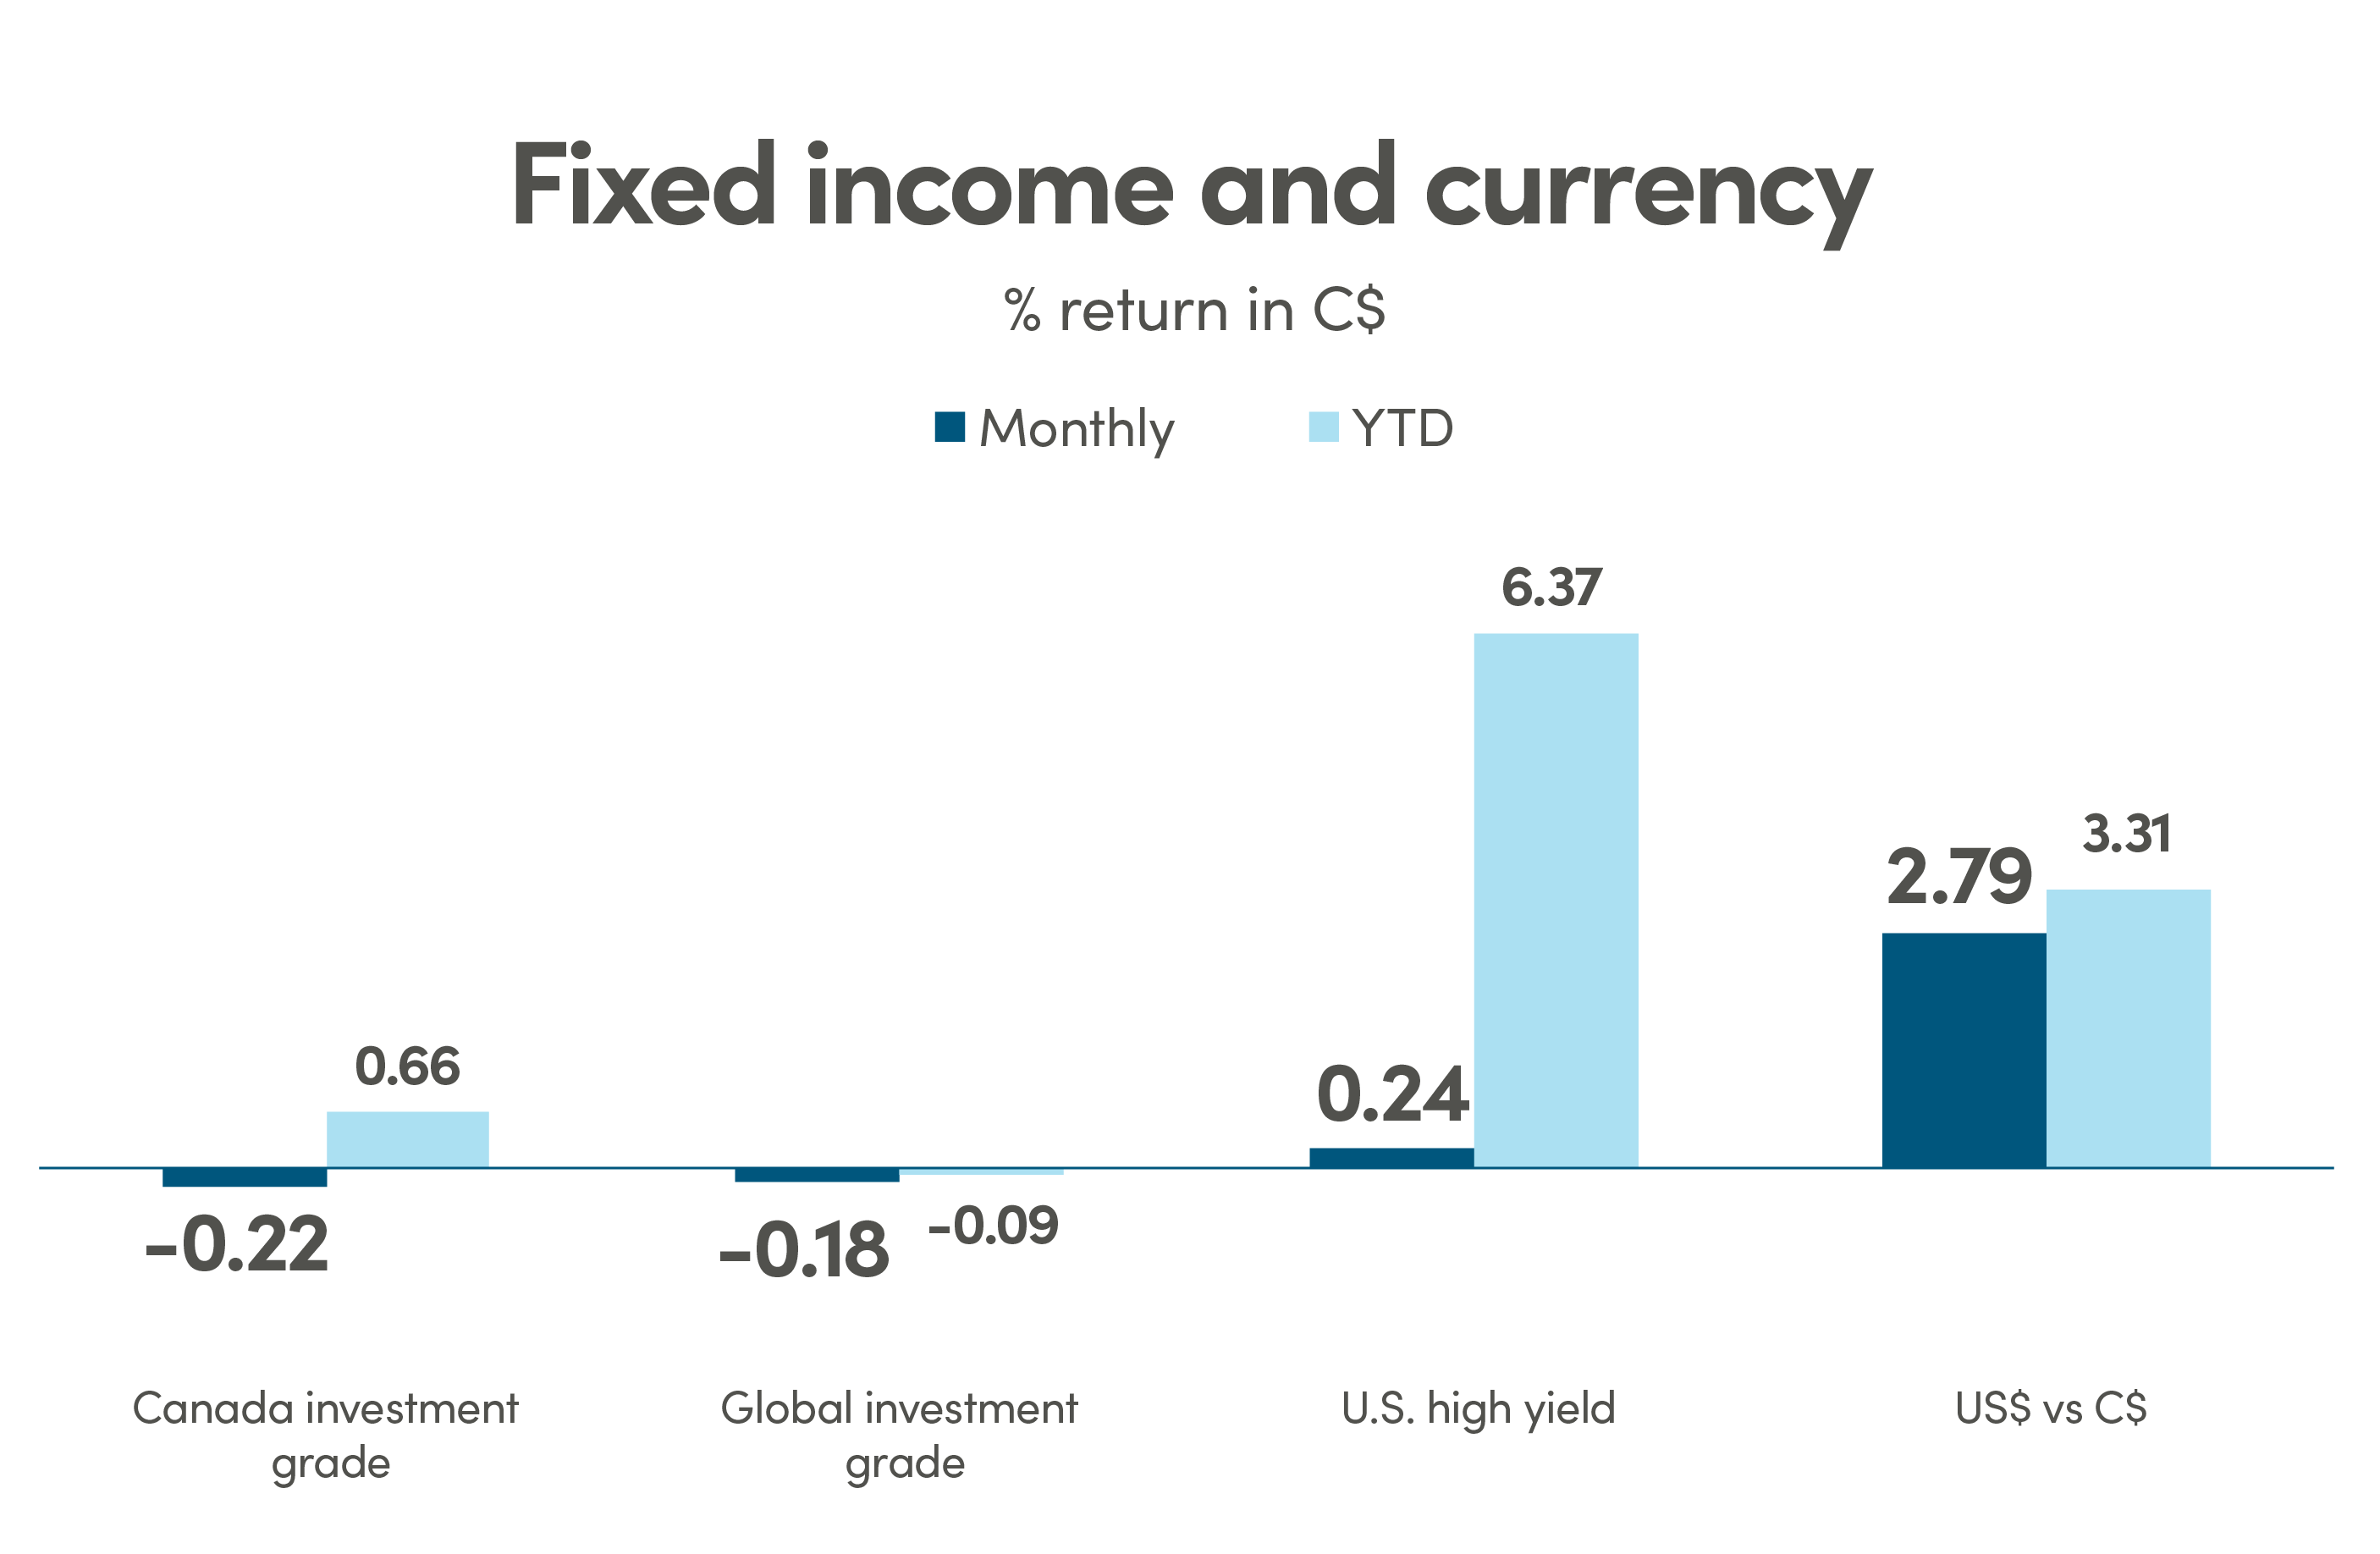 Bar graph showing % return in CAD (C$) for fixed income and currency. Canada investment grade monthly return is -0.22% and YTD is 0.66%. Global investment grade monthly return is -0.18% and YTD is -0.09%. US high yield monthly return is 0.24% and YTD is 6.37%. US$ vs C$ monthly return is 2.79% and YTD is 3.31%